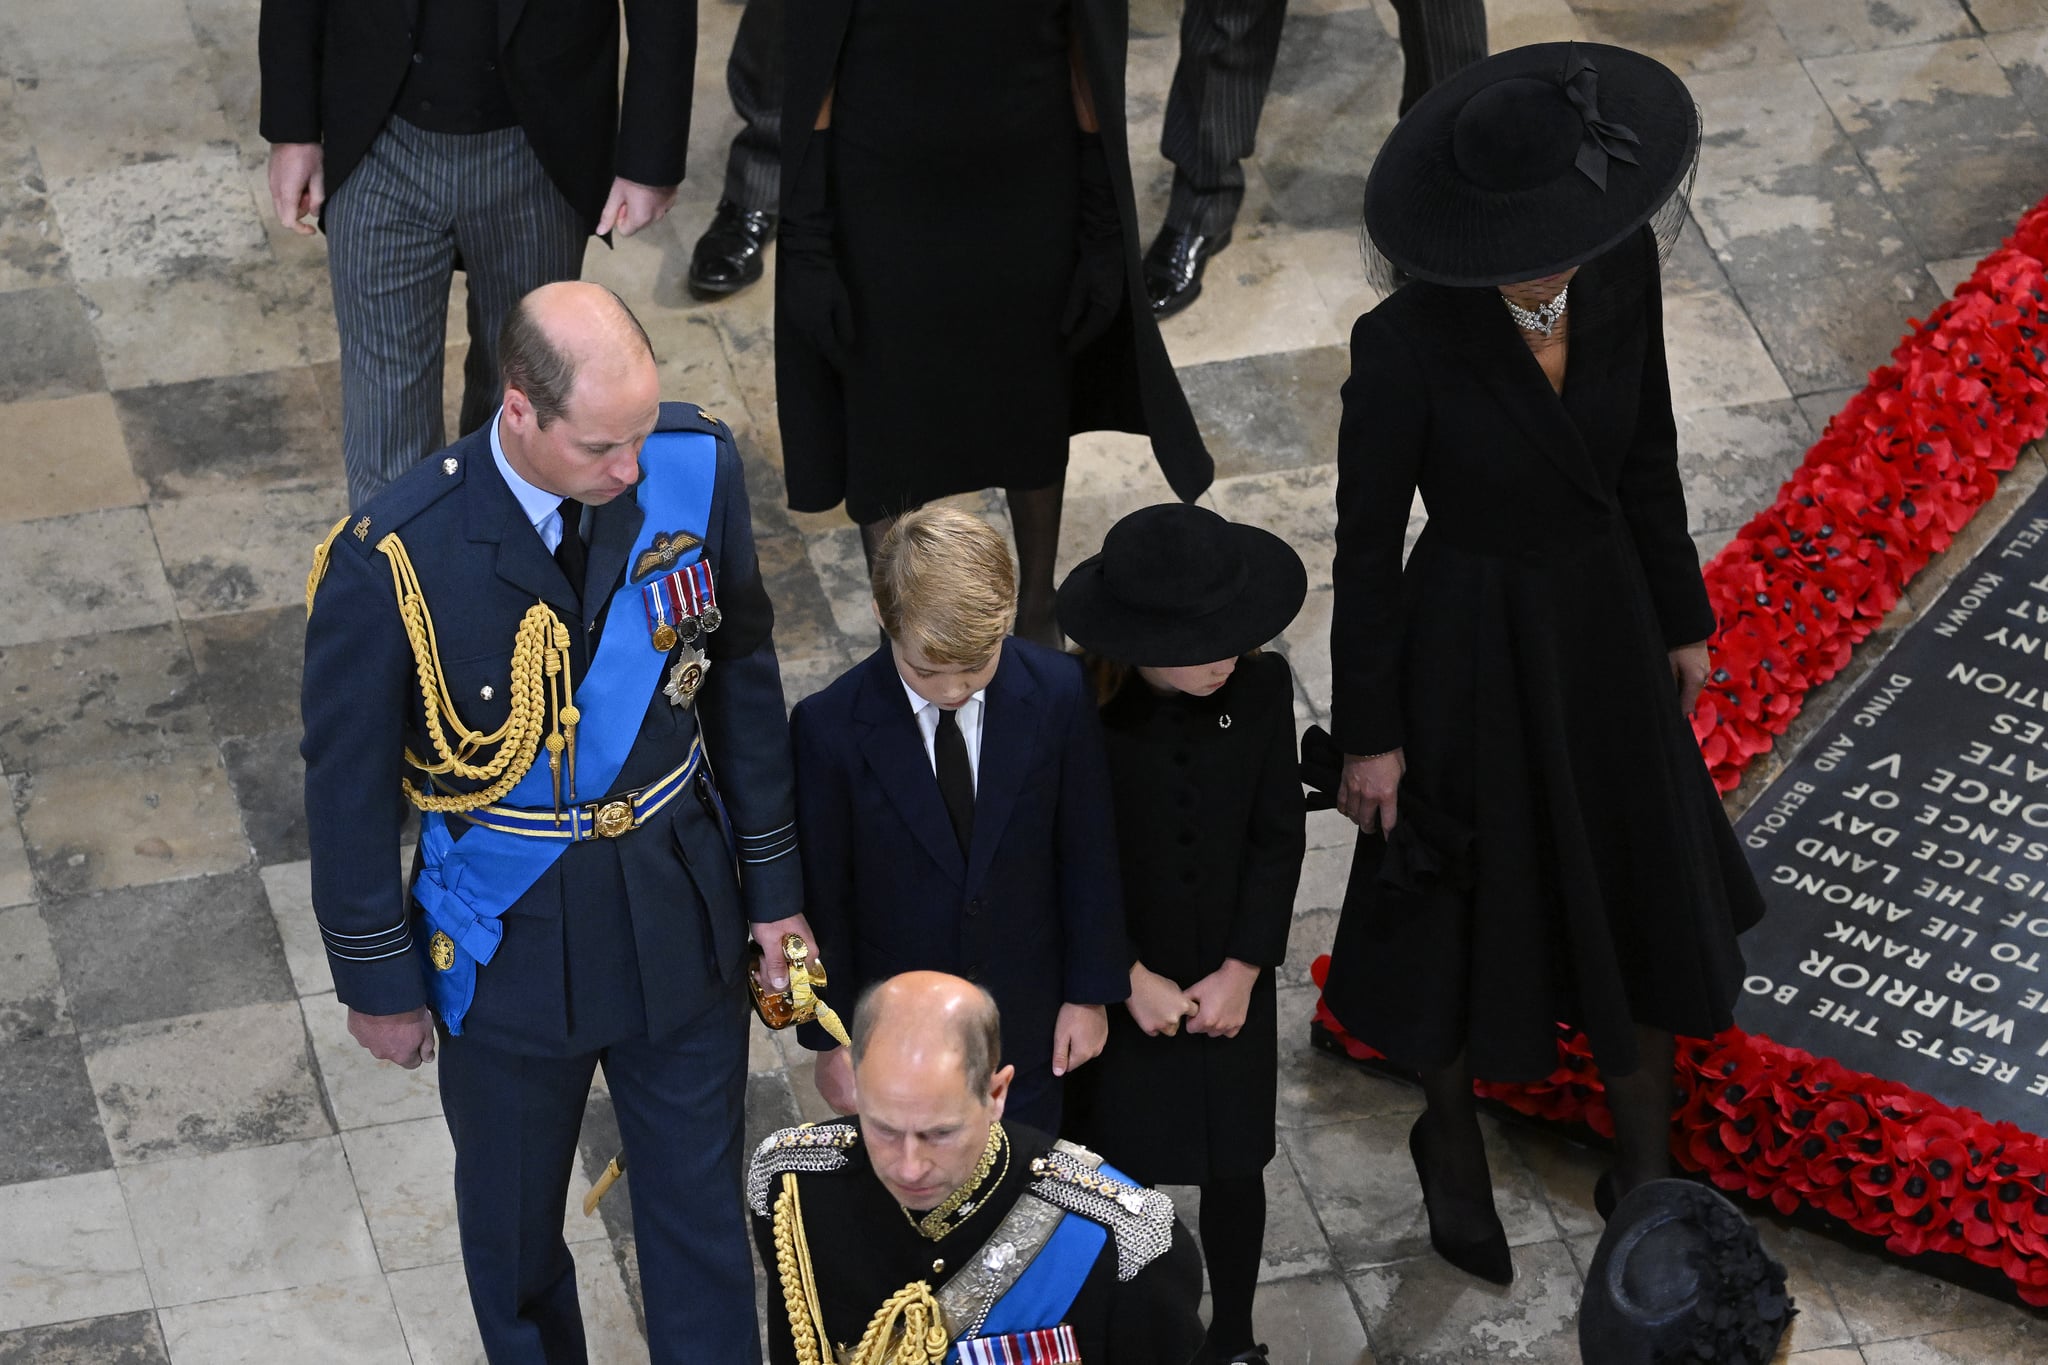 LONDON, ENGLAND - SEPTEMBER 19: William, Prince of Wales, Prince George of Wales, Princess Charlotte of Wales and Catherine, Princess of Wales departing Westminster Abbey during the State Funeral of Queen Elizabeth II on September 19, 2022 in London, England. Elizabeth Alexandra Mary Windsor was born in Bruton Street, Mayfair, London on 21 April 1926. She married Prince Philip in 1947 and ascended the throne of the United Kingdom and Commonwealth on 6 February 1952 after the death of her Father, King George VI. Queen Elizabeth II died at Balmoral Castle in Scotland on September 8, 2022, and is succeeded by her eldest son, King Charles III.  (Photo by Gareth Cattermole/Getty Images)